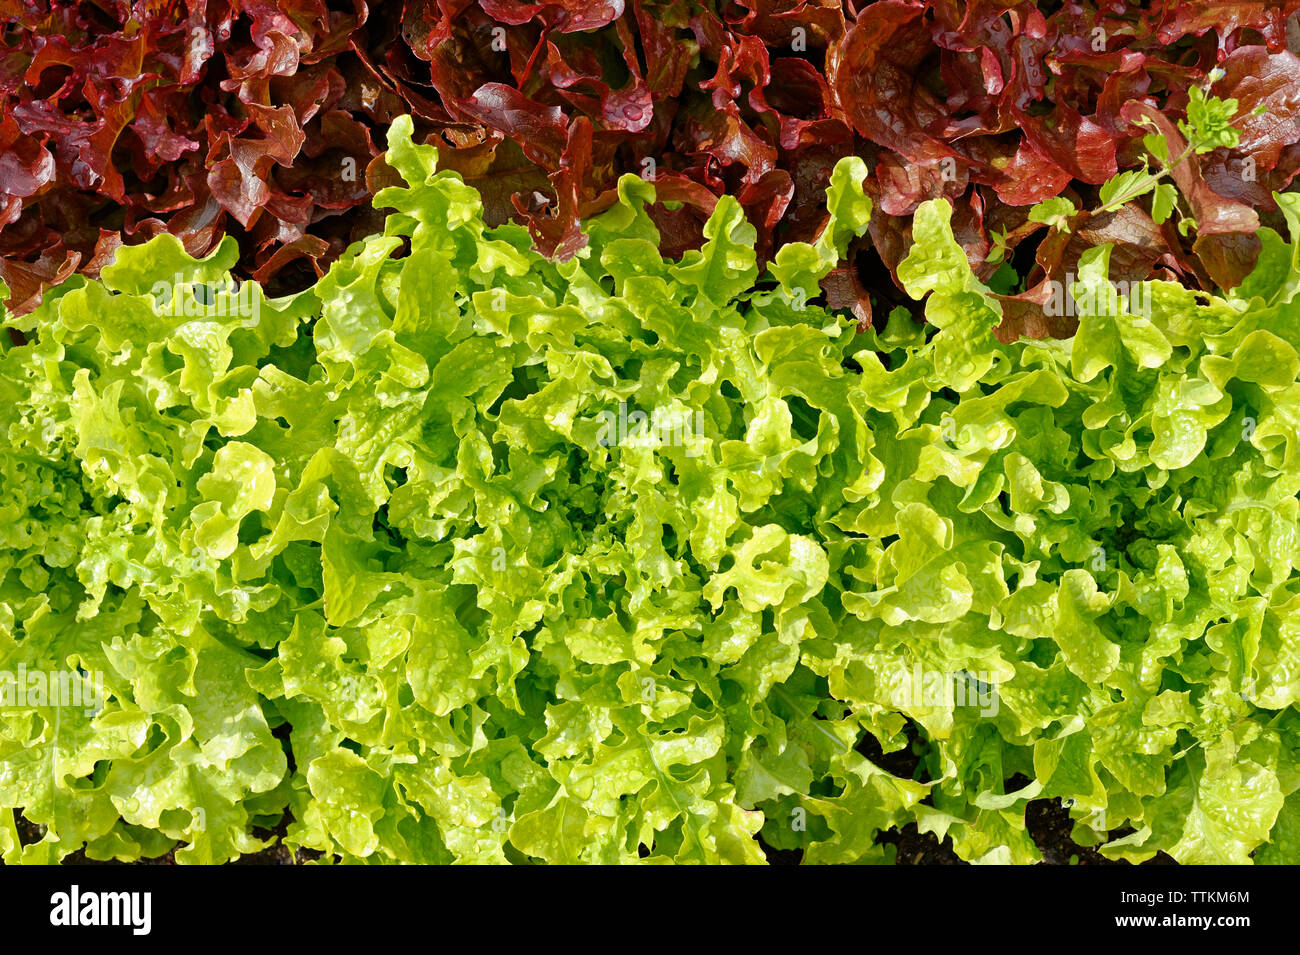 lettuce green and red Stock Photo